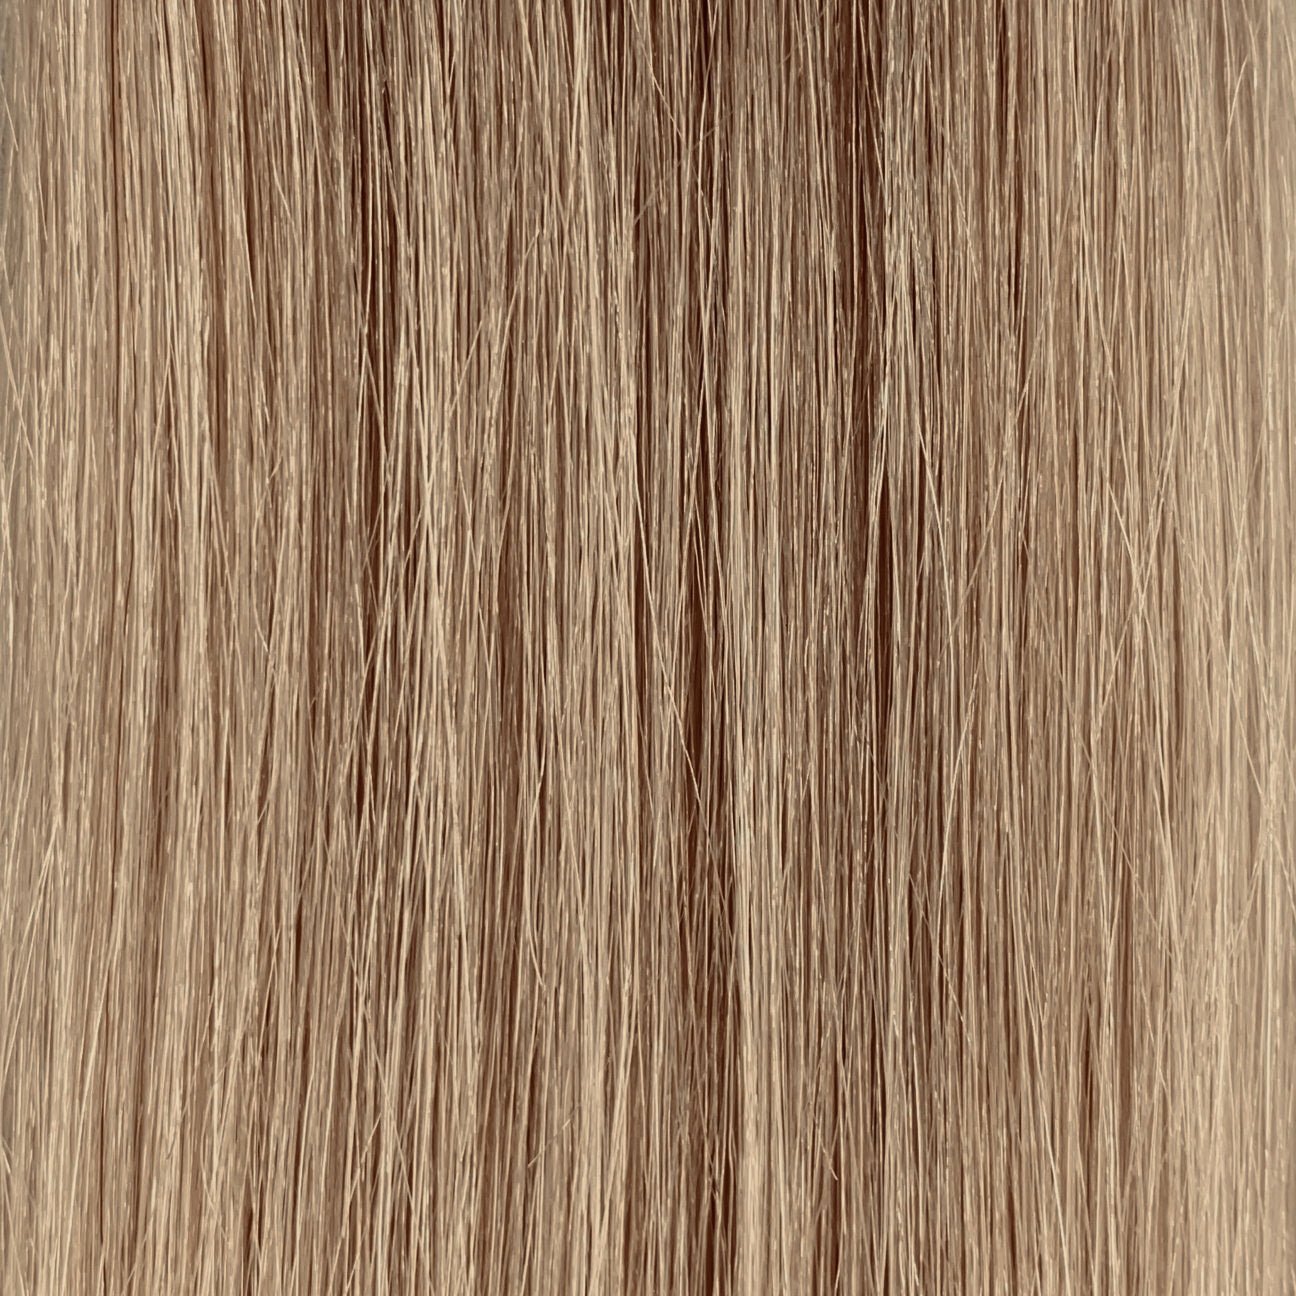 40 cm | Normal Tape Extensions | No. 10 naturblond